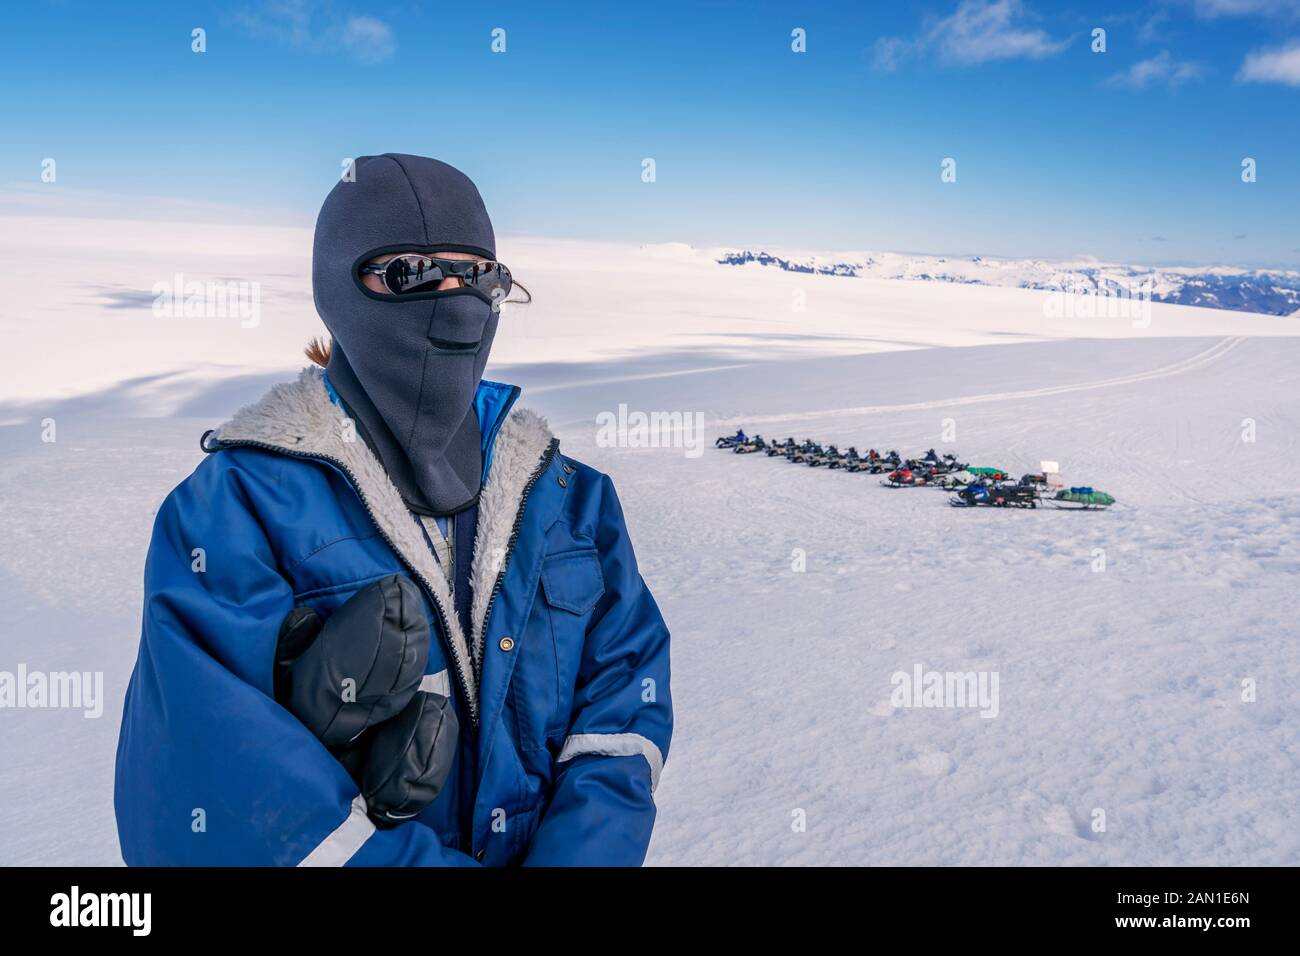 Scientist wearing protective gear, The Glaciological society spring expedition, Vatnajokull Glacier, Iceland Stock Photo